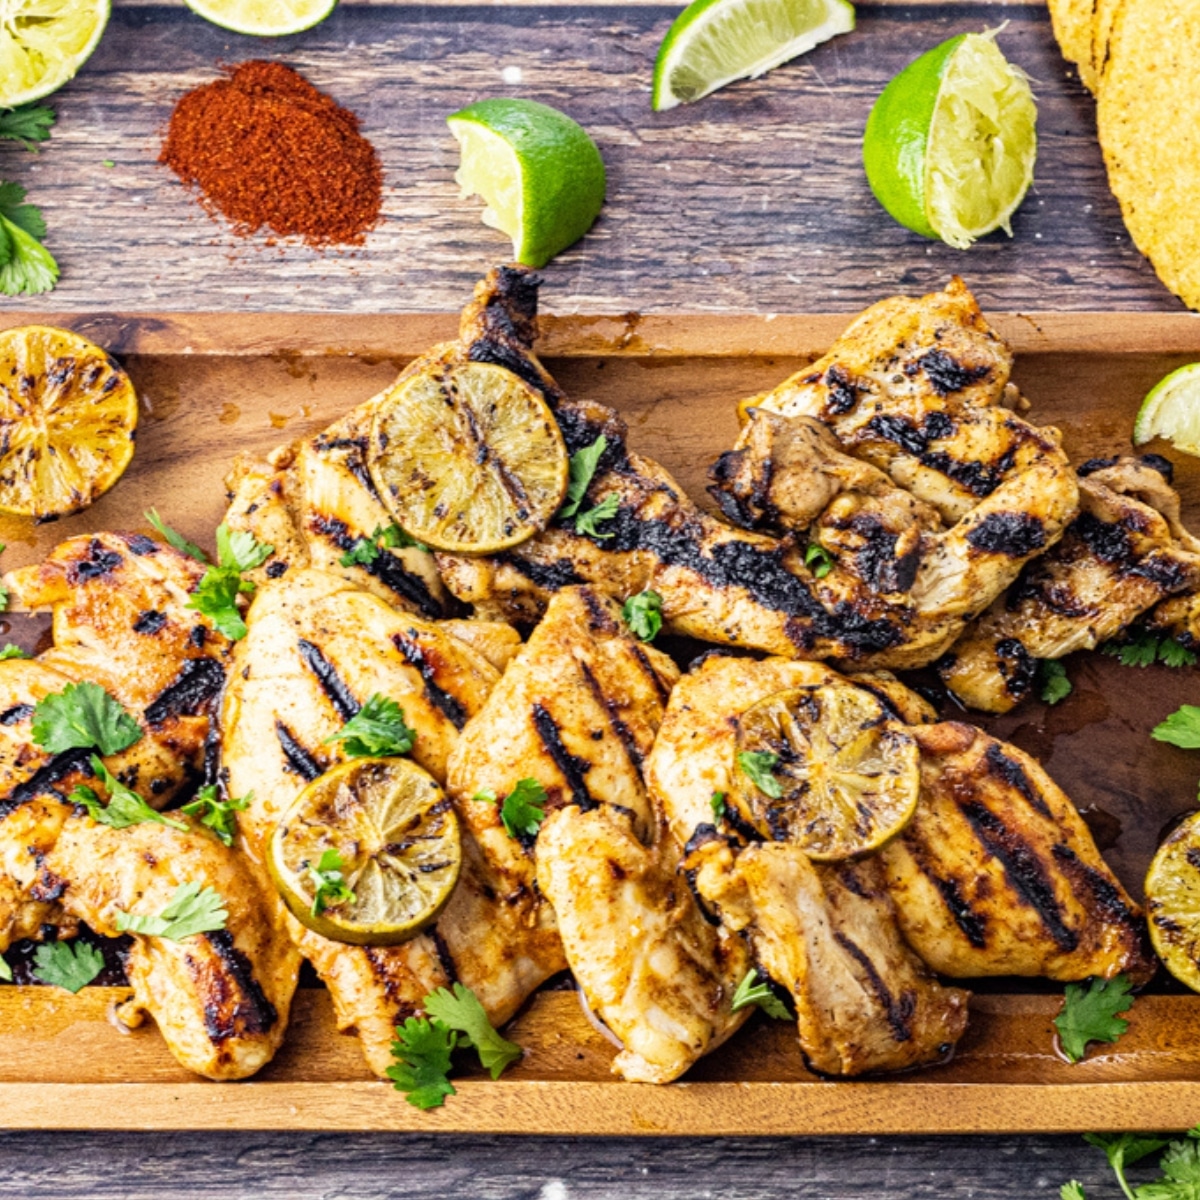 lime and chili marinated chicken grilled and on a wooden serving platter